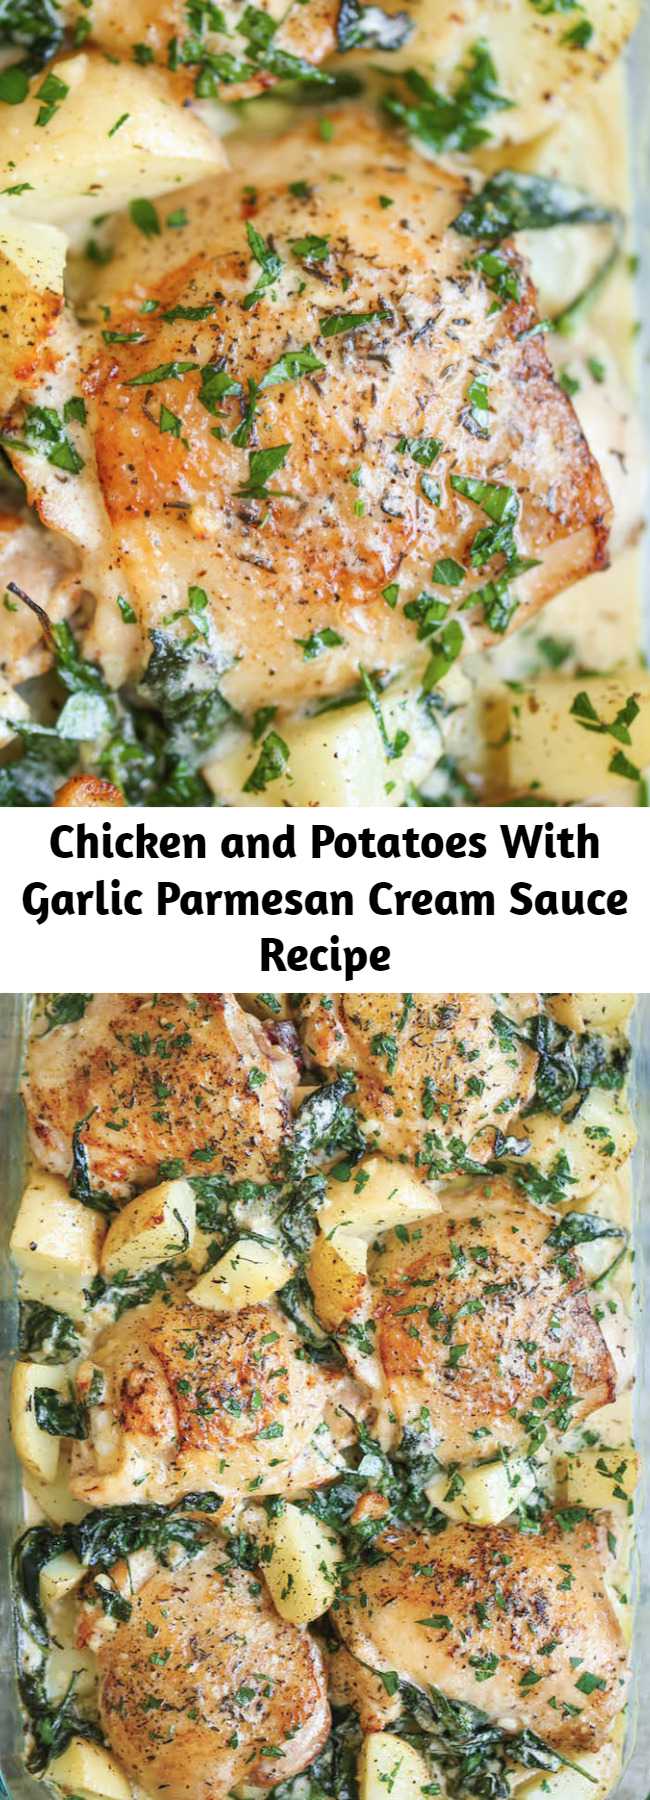 Chicken and Potatoes With Garlic Parmesan Cream Sauce Recipe - Crisp-tender chicken baked to absolute perfection with potatoes and spinach. A complete meal in one!